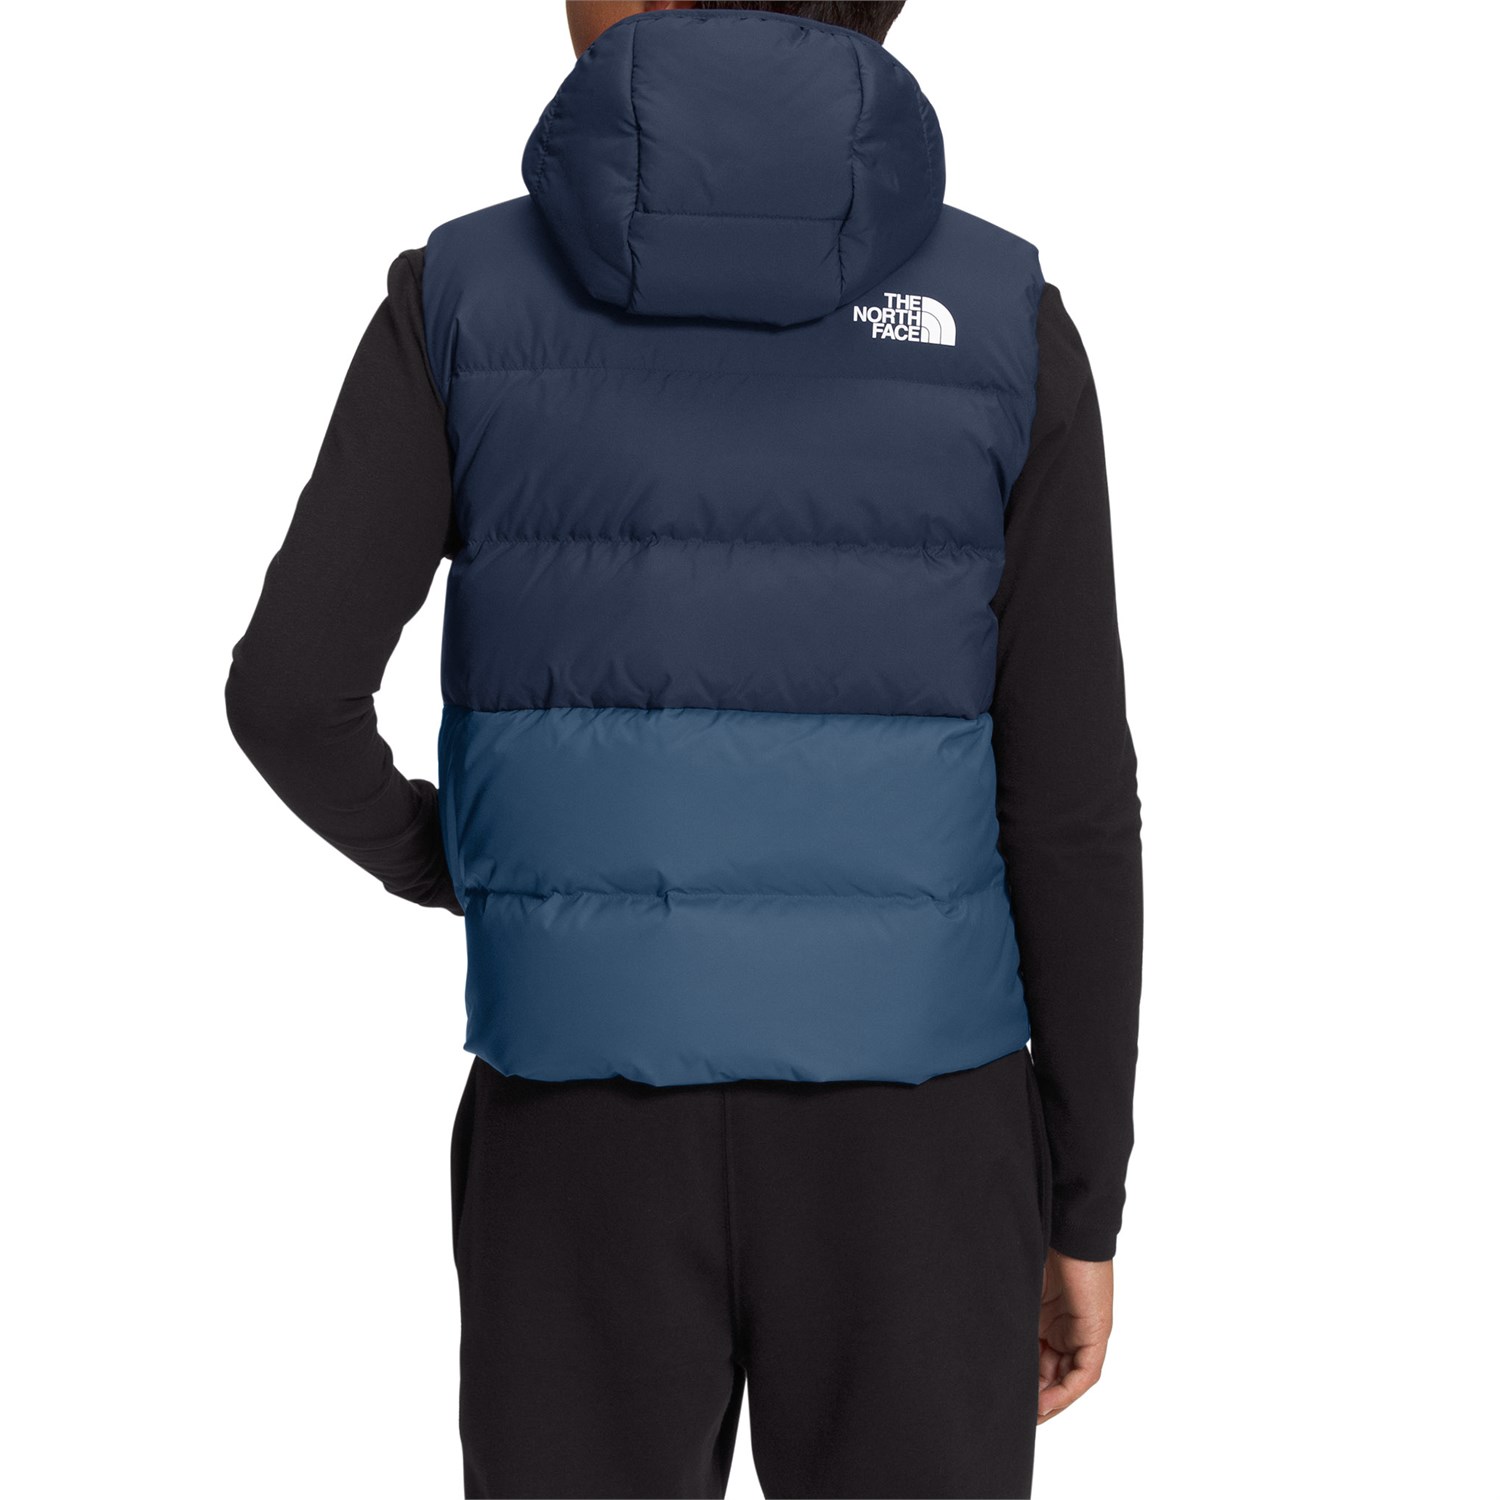 The North Face Reversible North Down Hooded Vest - Big Boys' | evo